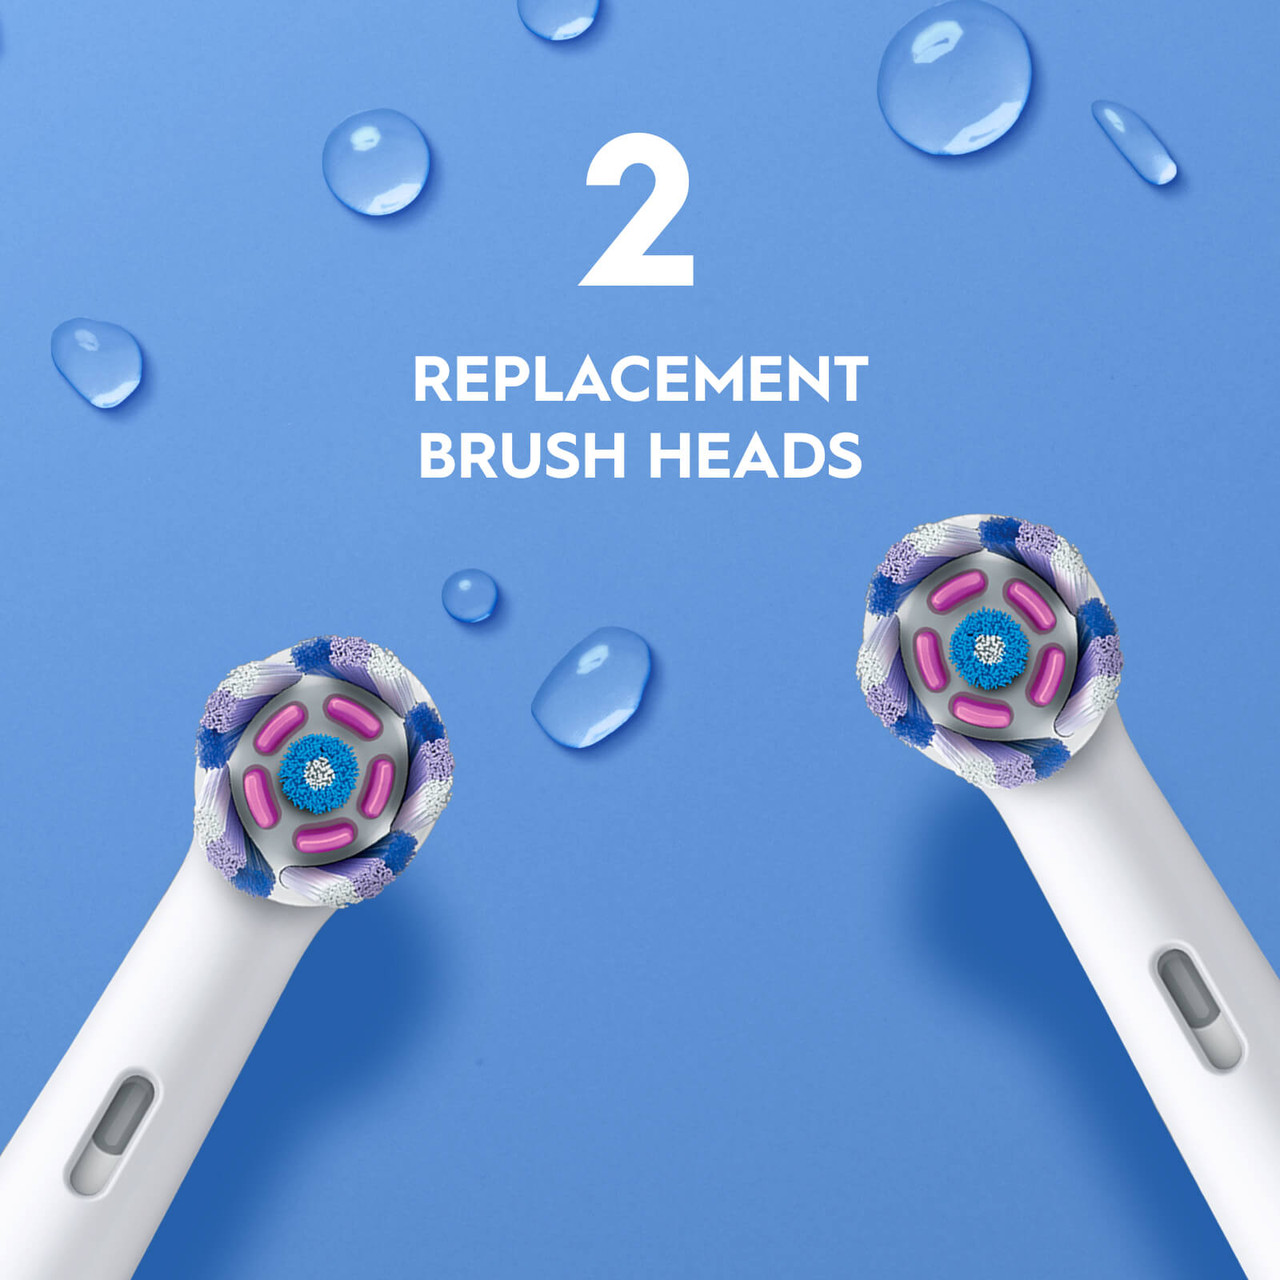 https://cdn11.bigcommerce.com/s-2idmiil7bp/images/stencil/1280x1280/products/951/4428/oral-b-replacement-brush-heads-whitening__22370.1702357219.jpg?c=1